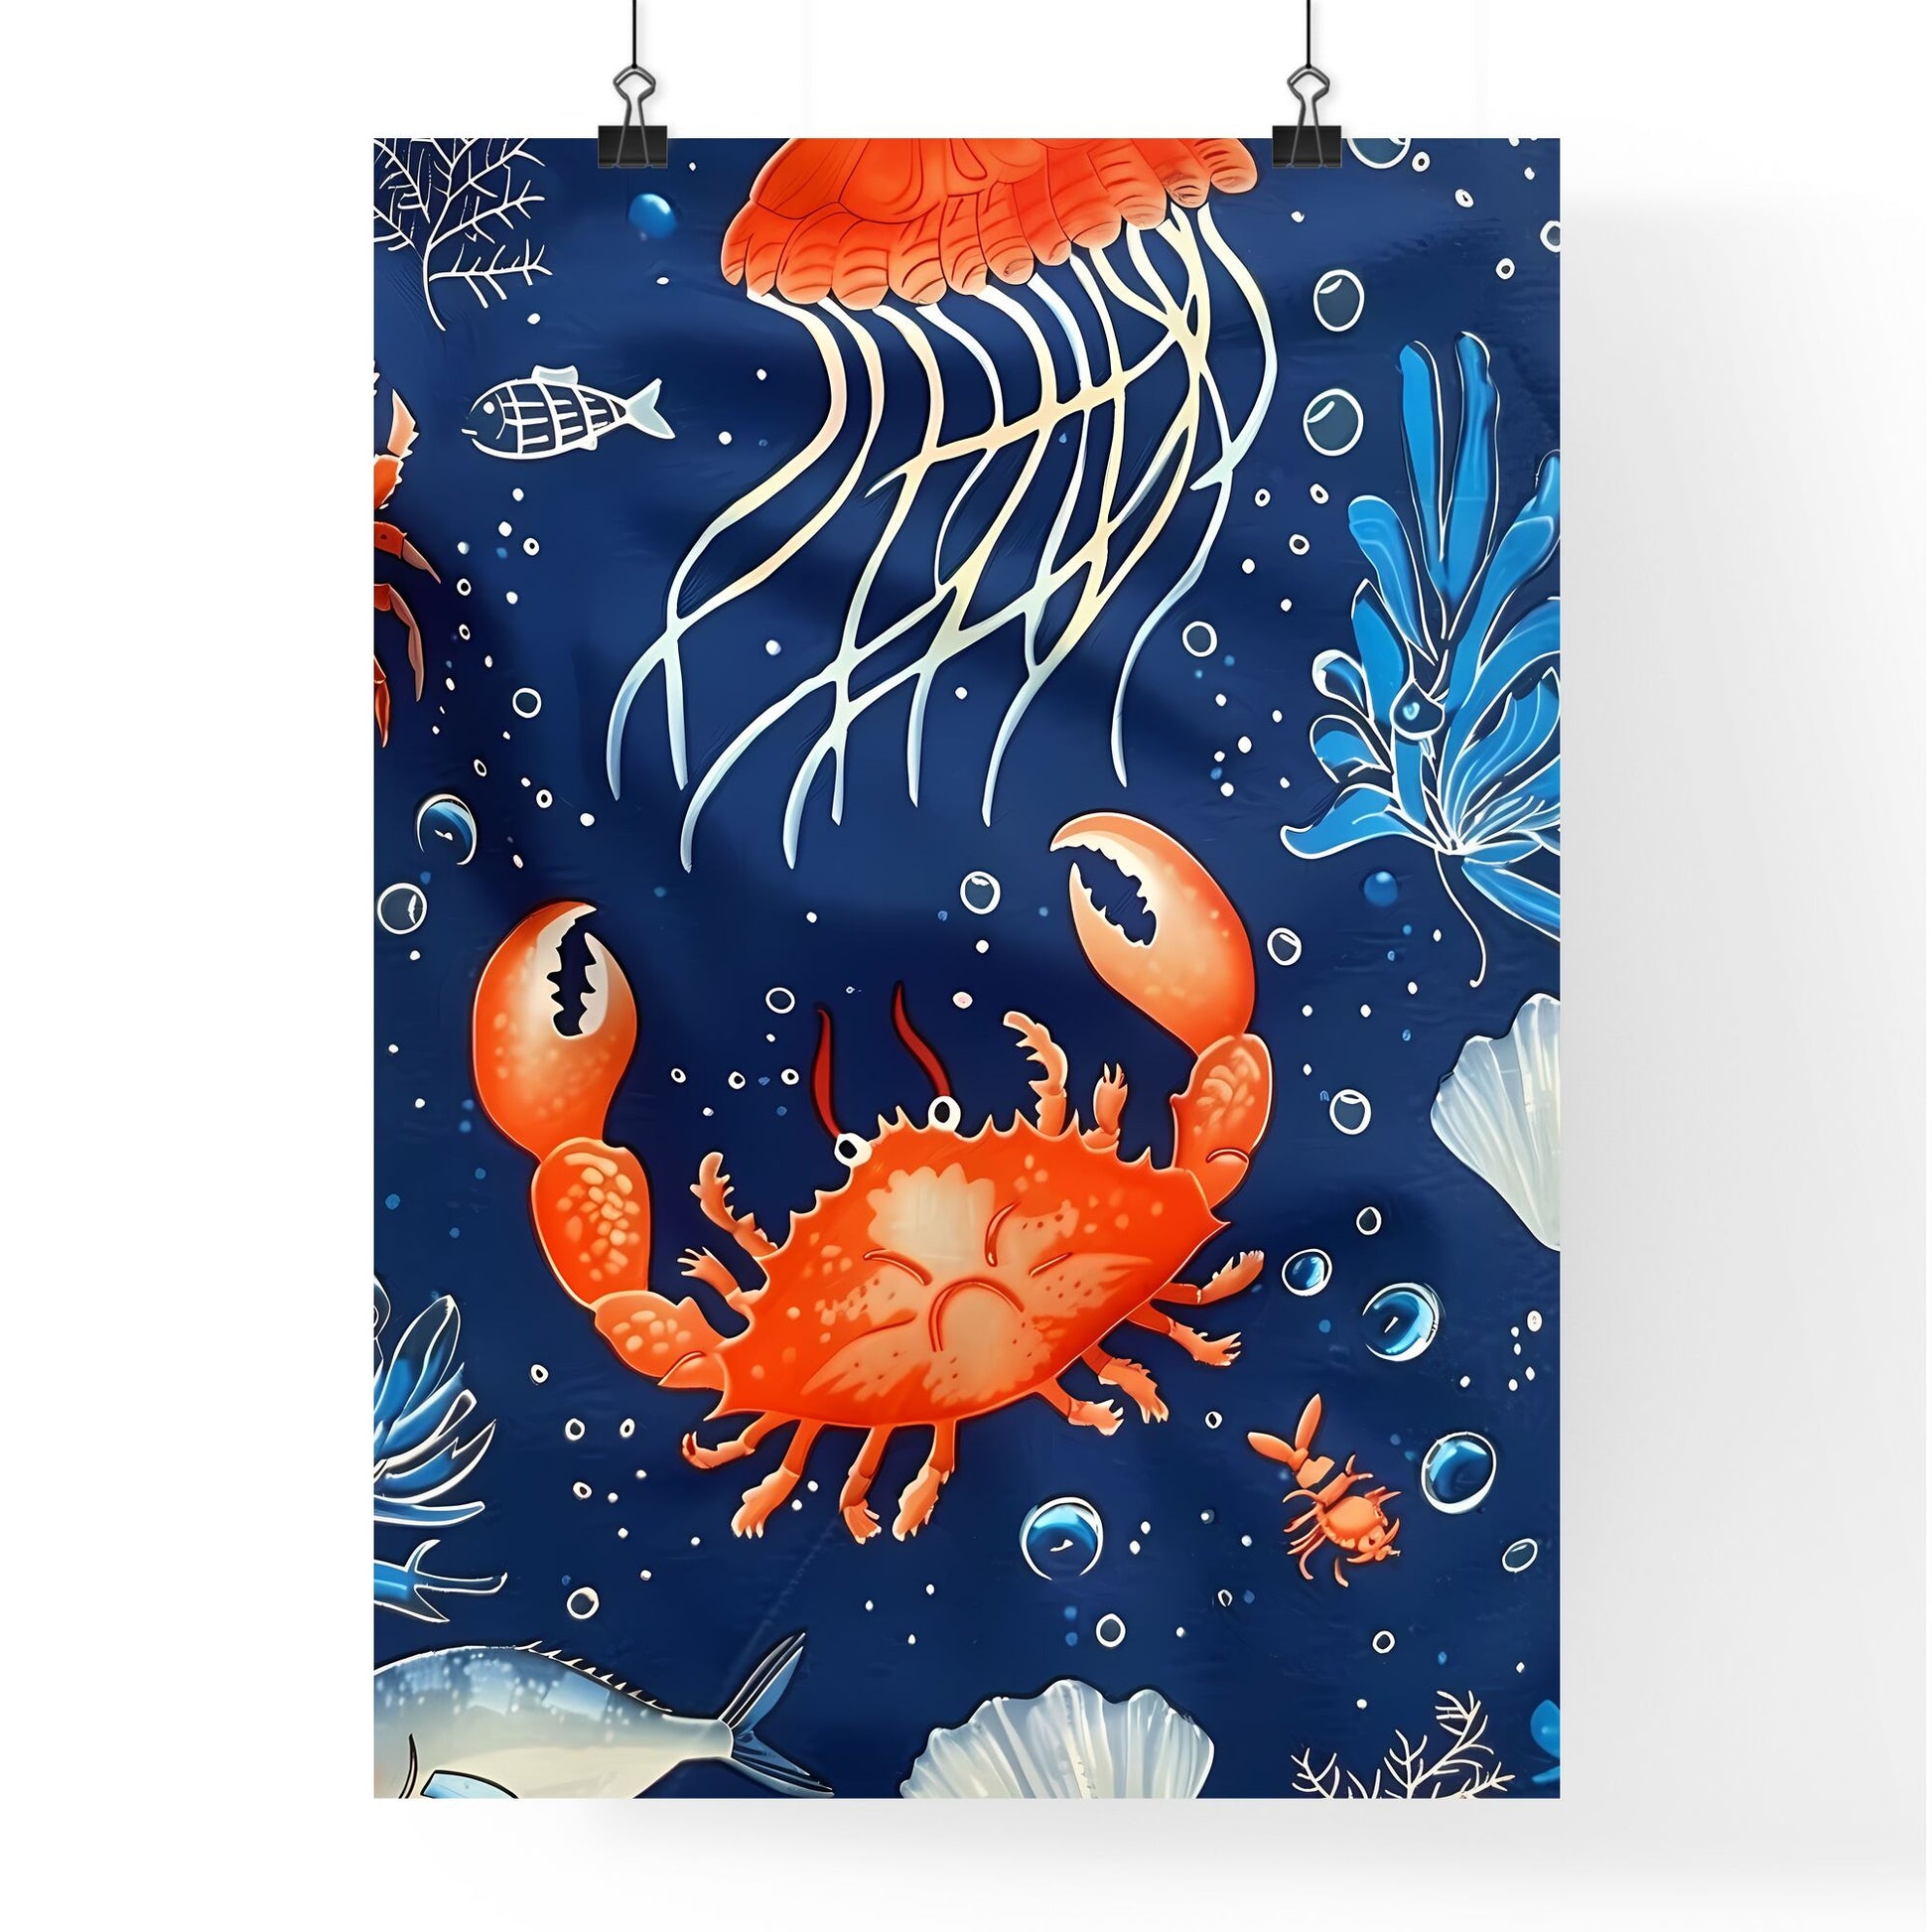 Vibrant Blue Fabric with Playful Sea Animal Patterns: Majestic Crab and Fish Artwork Default Title